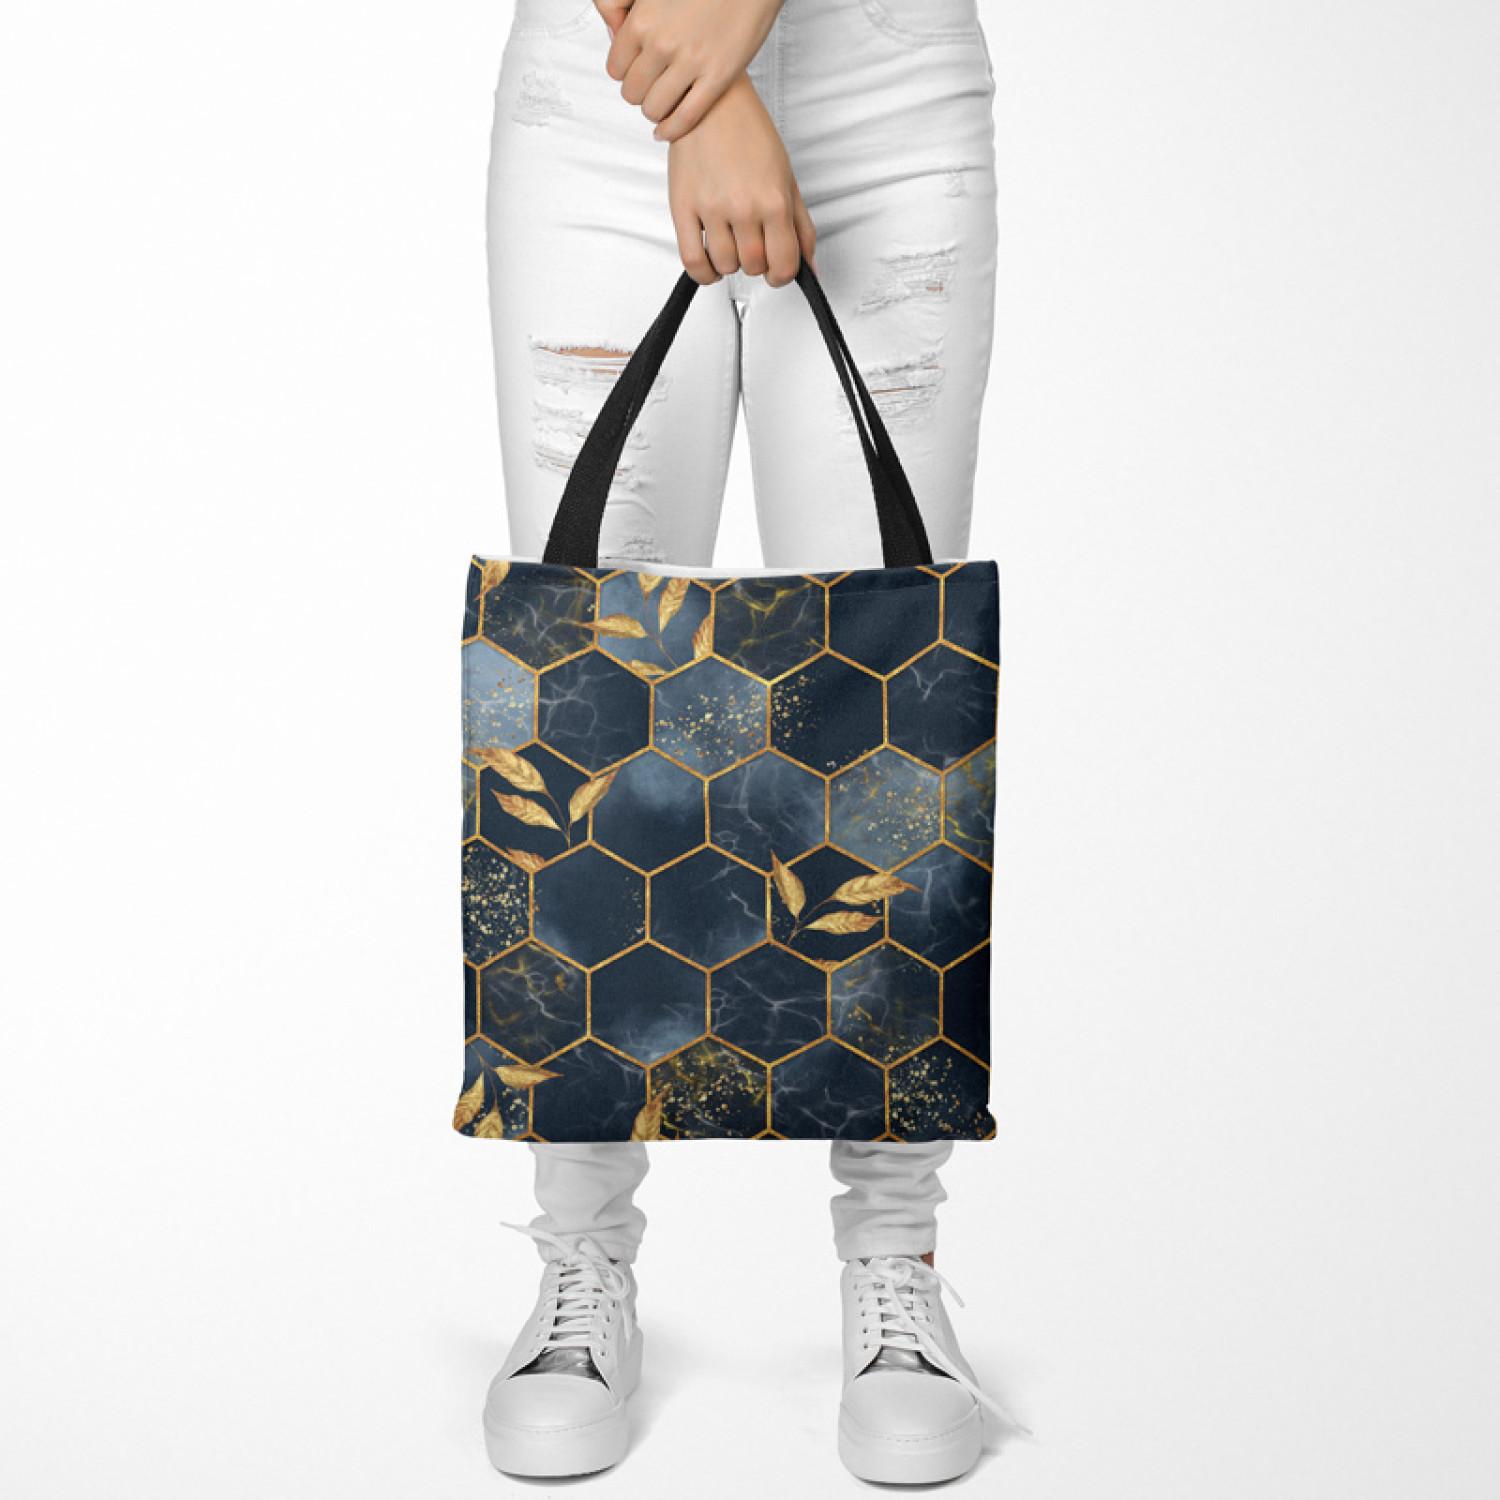 Shopping Bag Geometry and leaves - composition in shades of blue and gold